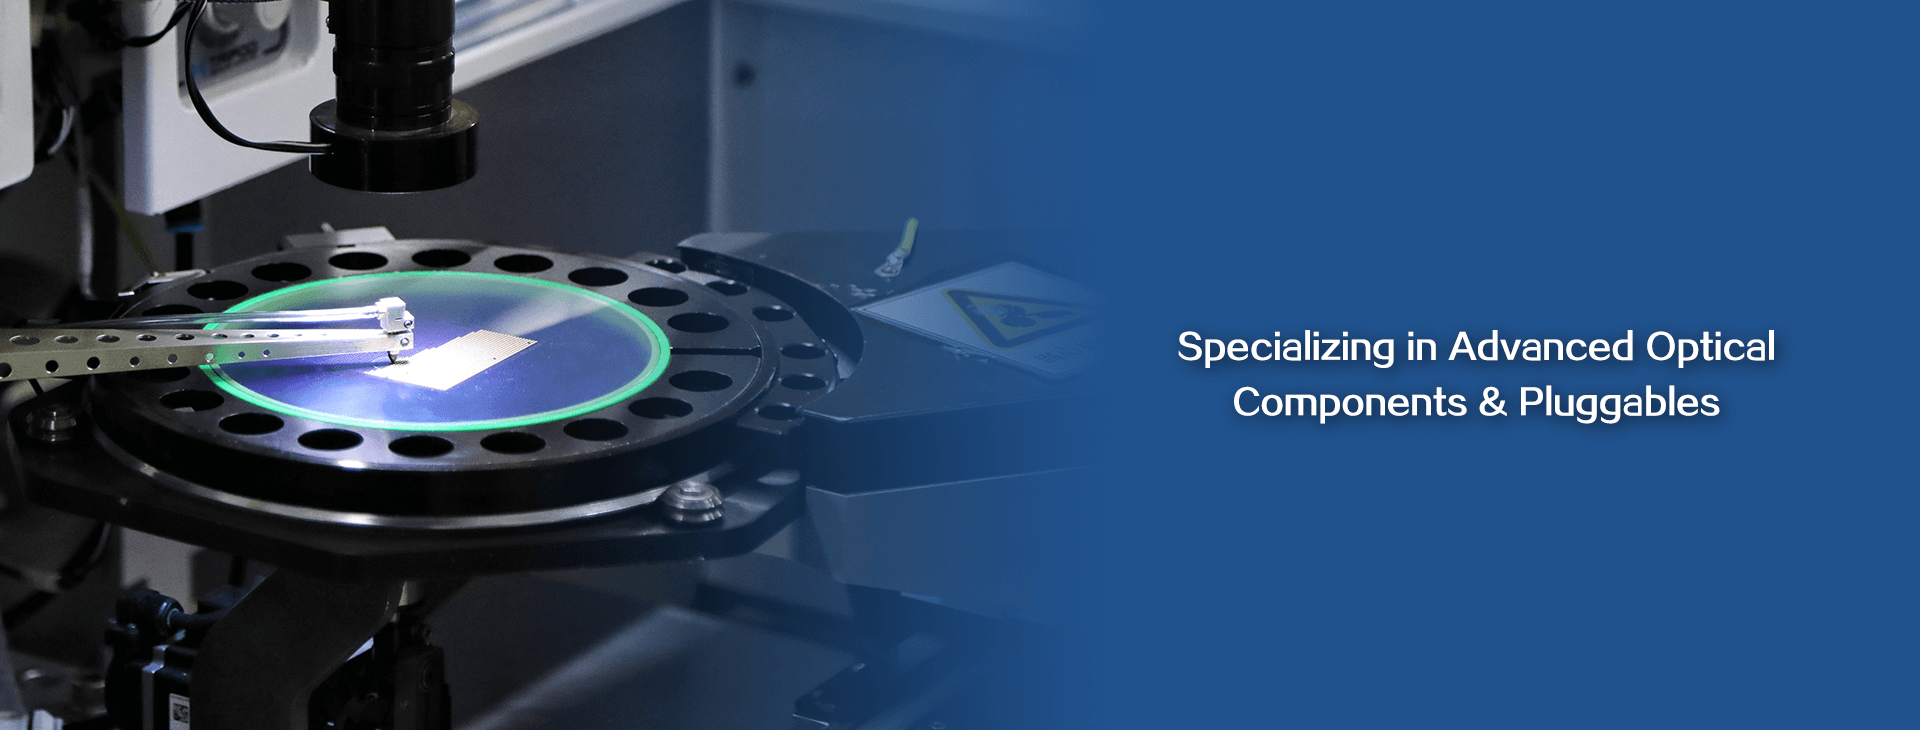 Specializing in Advanced Optical Components & Pluggables